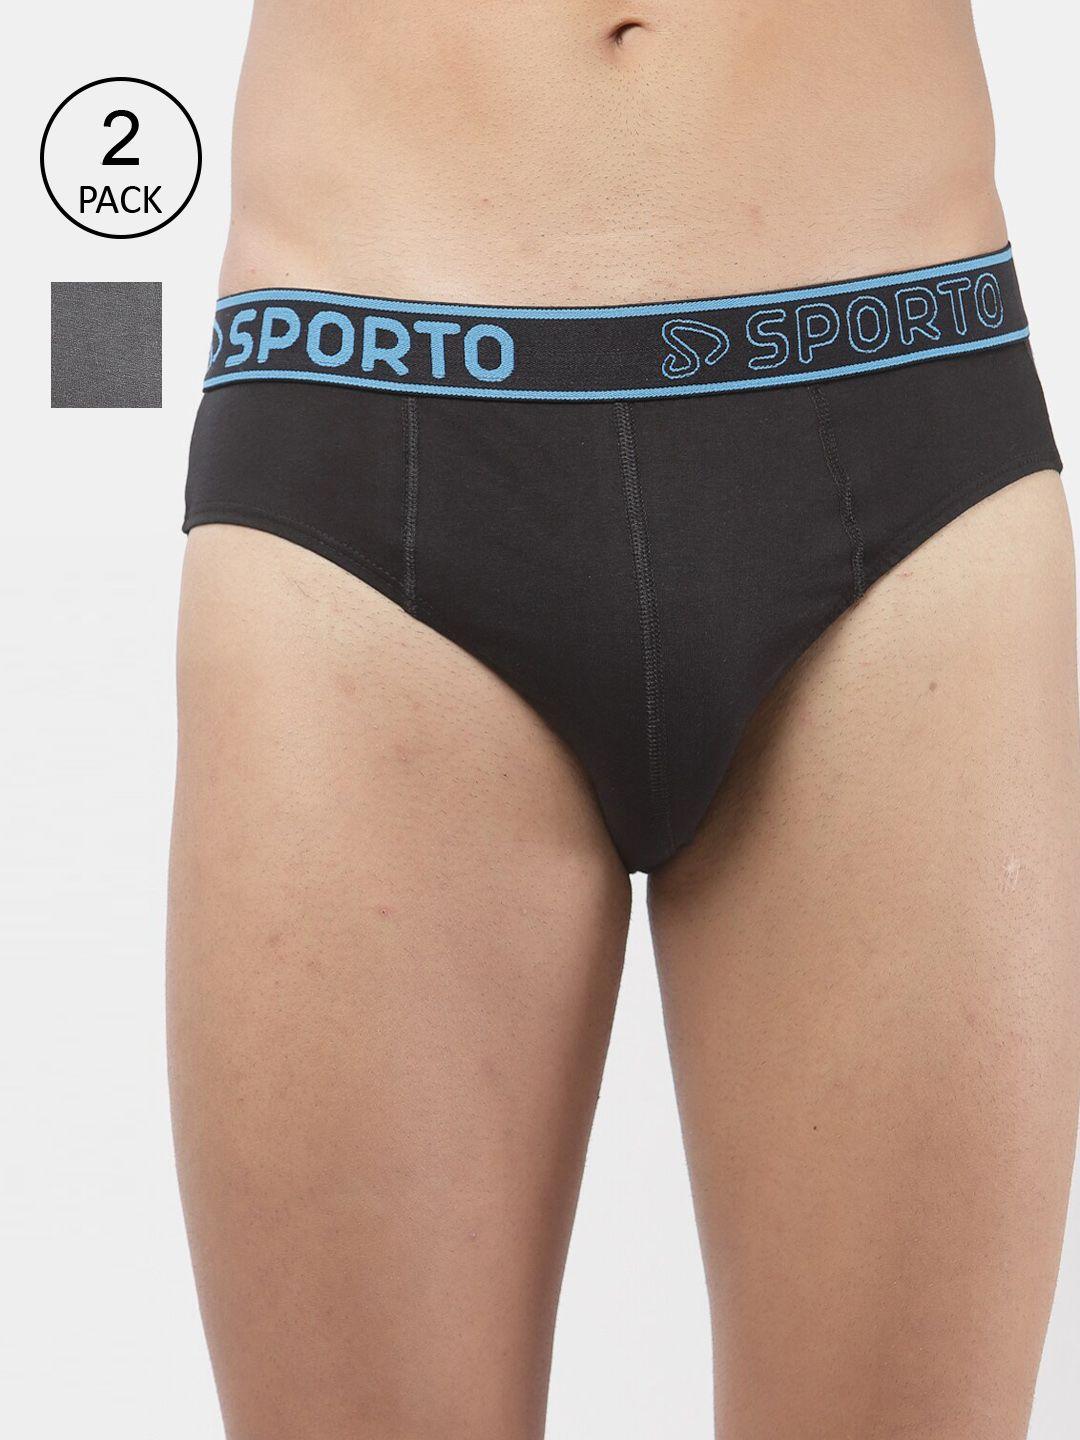 sporto men pack of 2 black & charcoal solid cotton basic briefs